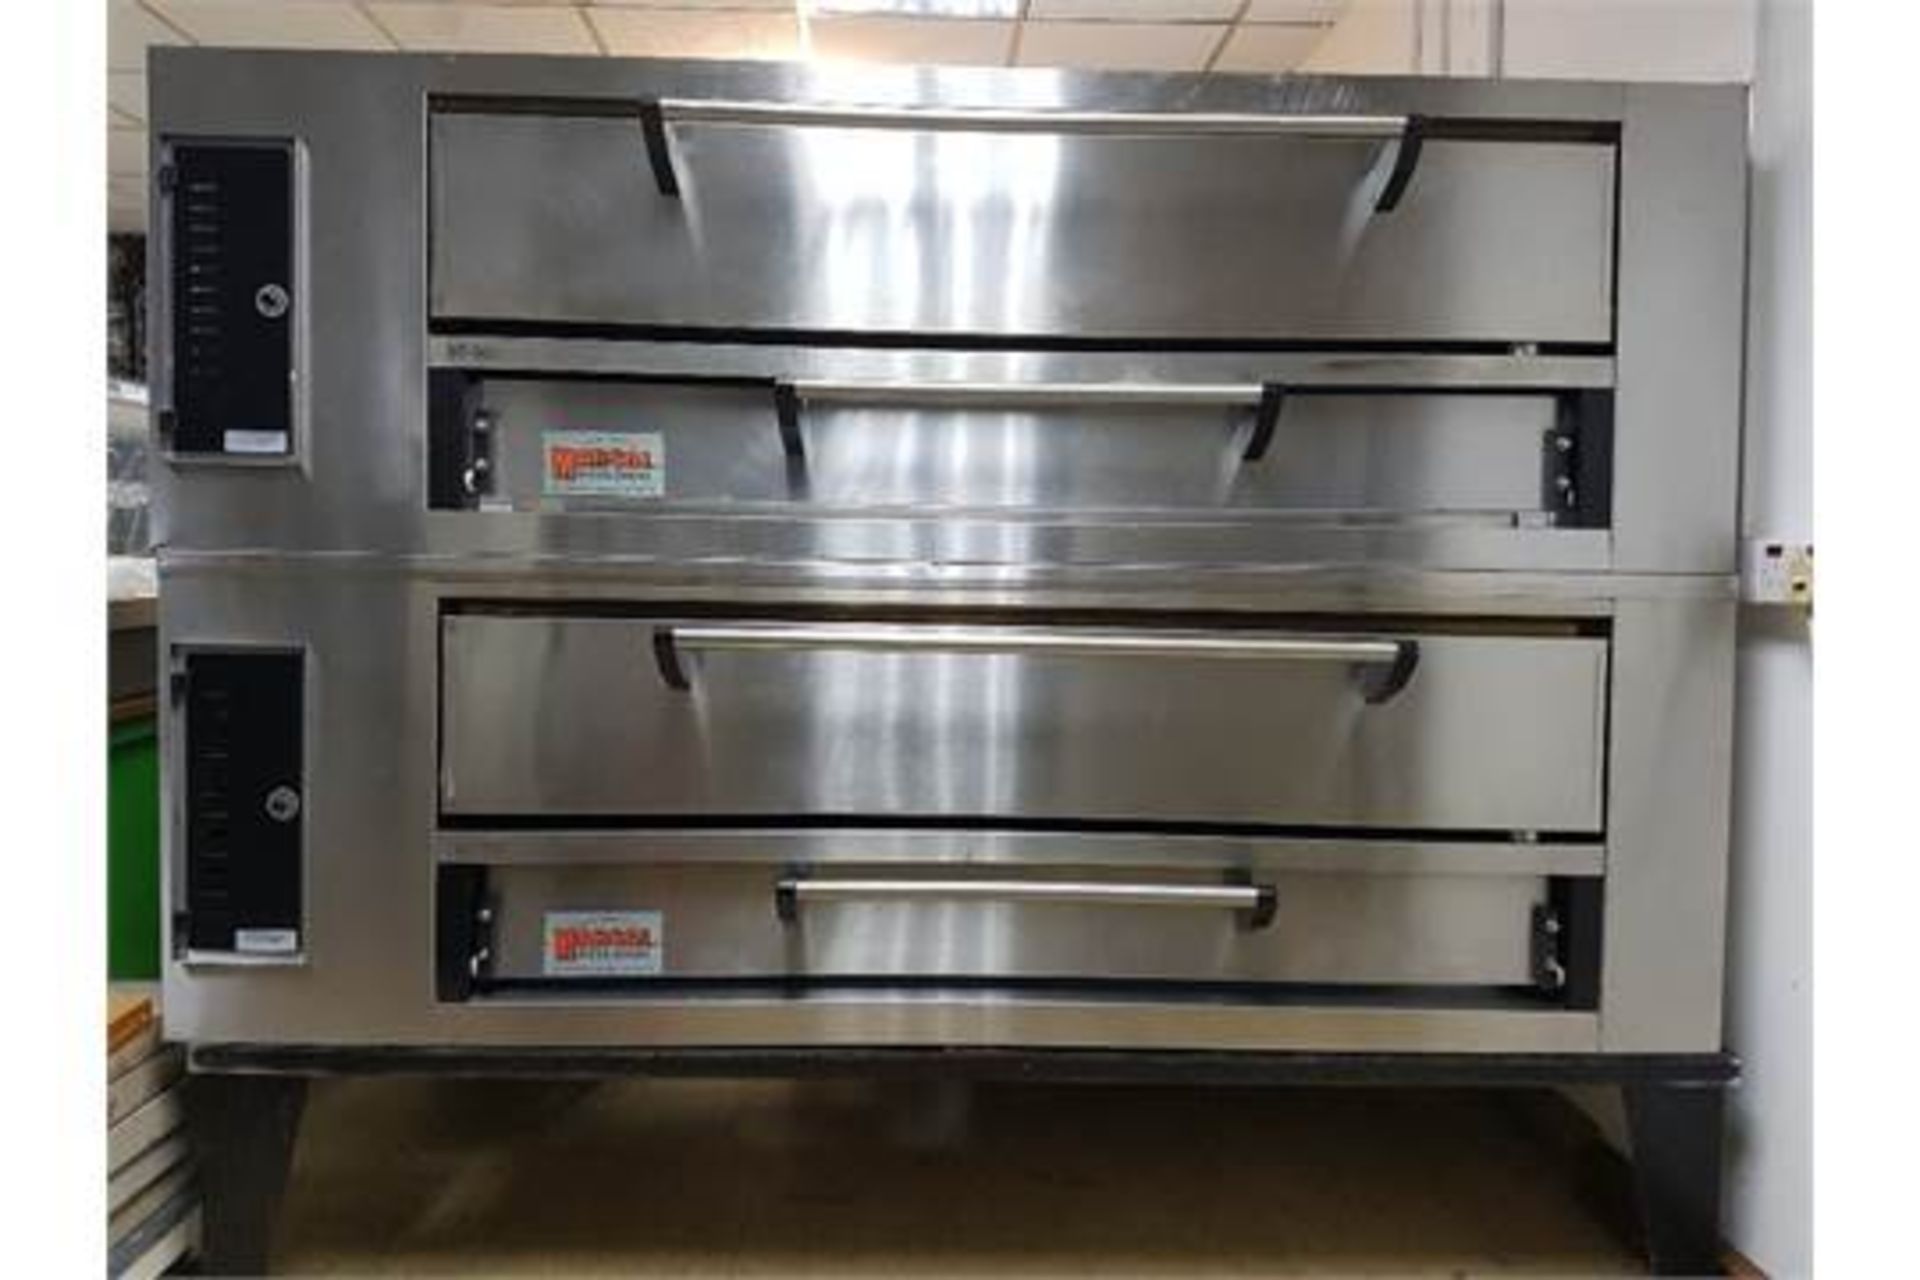 Marsal SD-660 Gas Deck Oven – Double Stack with Standing Stainless Steel – Bakes 12 x 18” Pizza